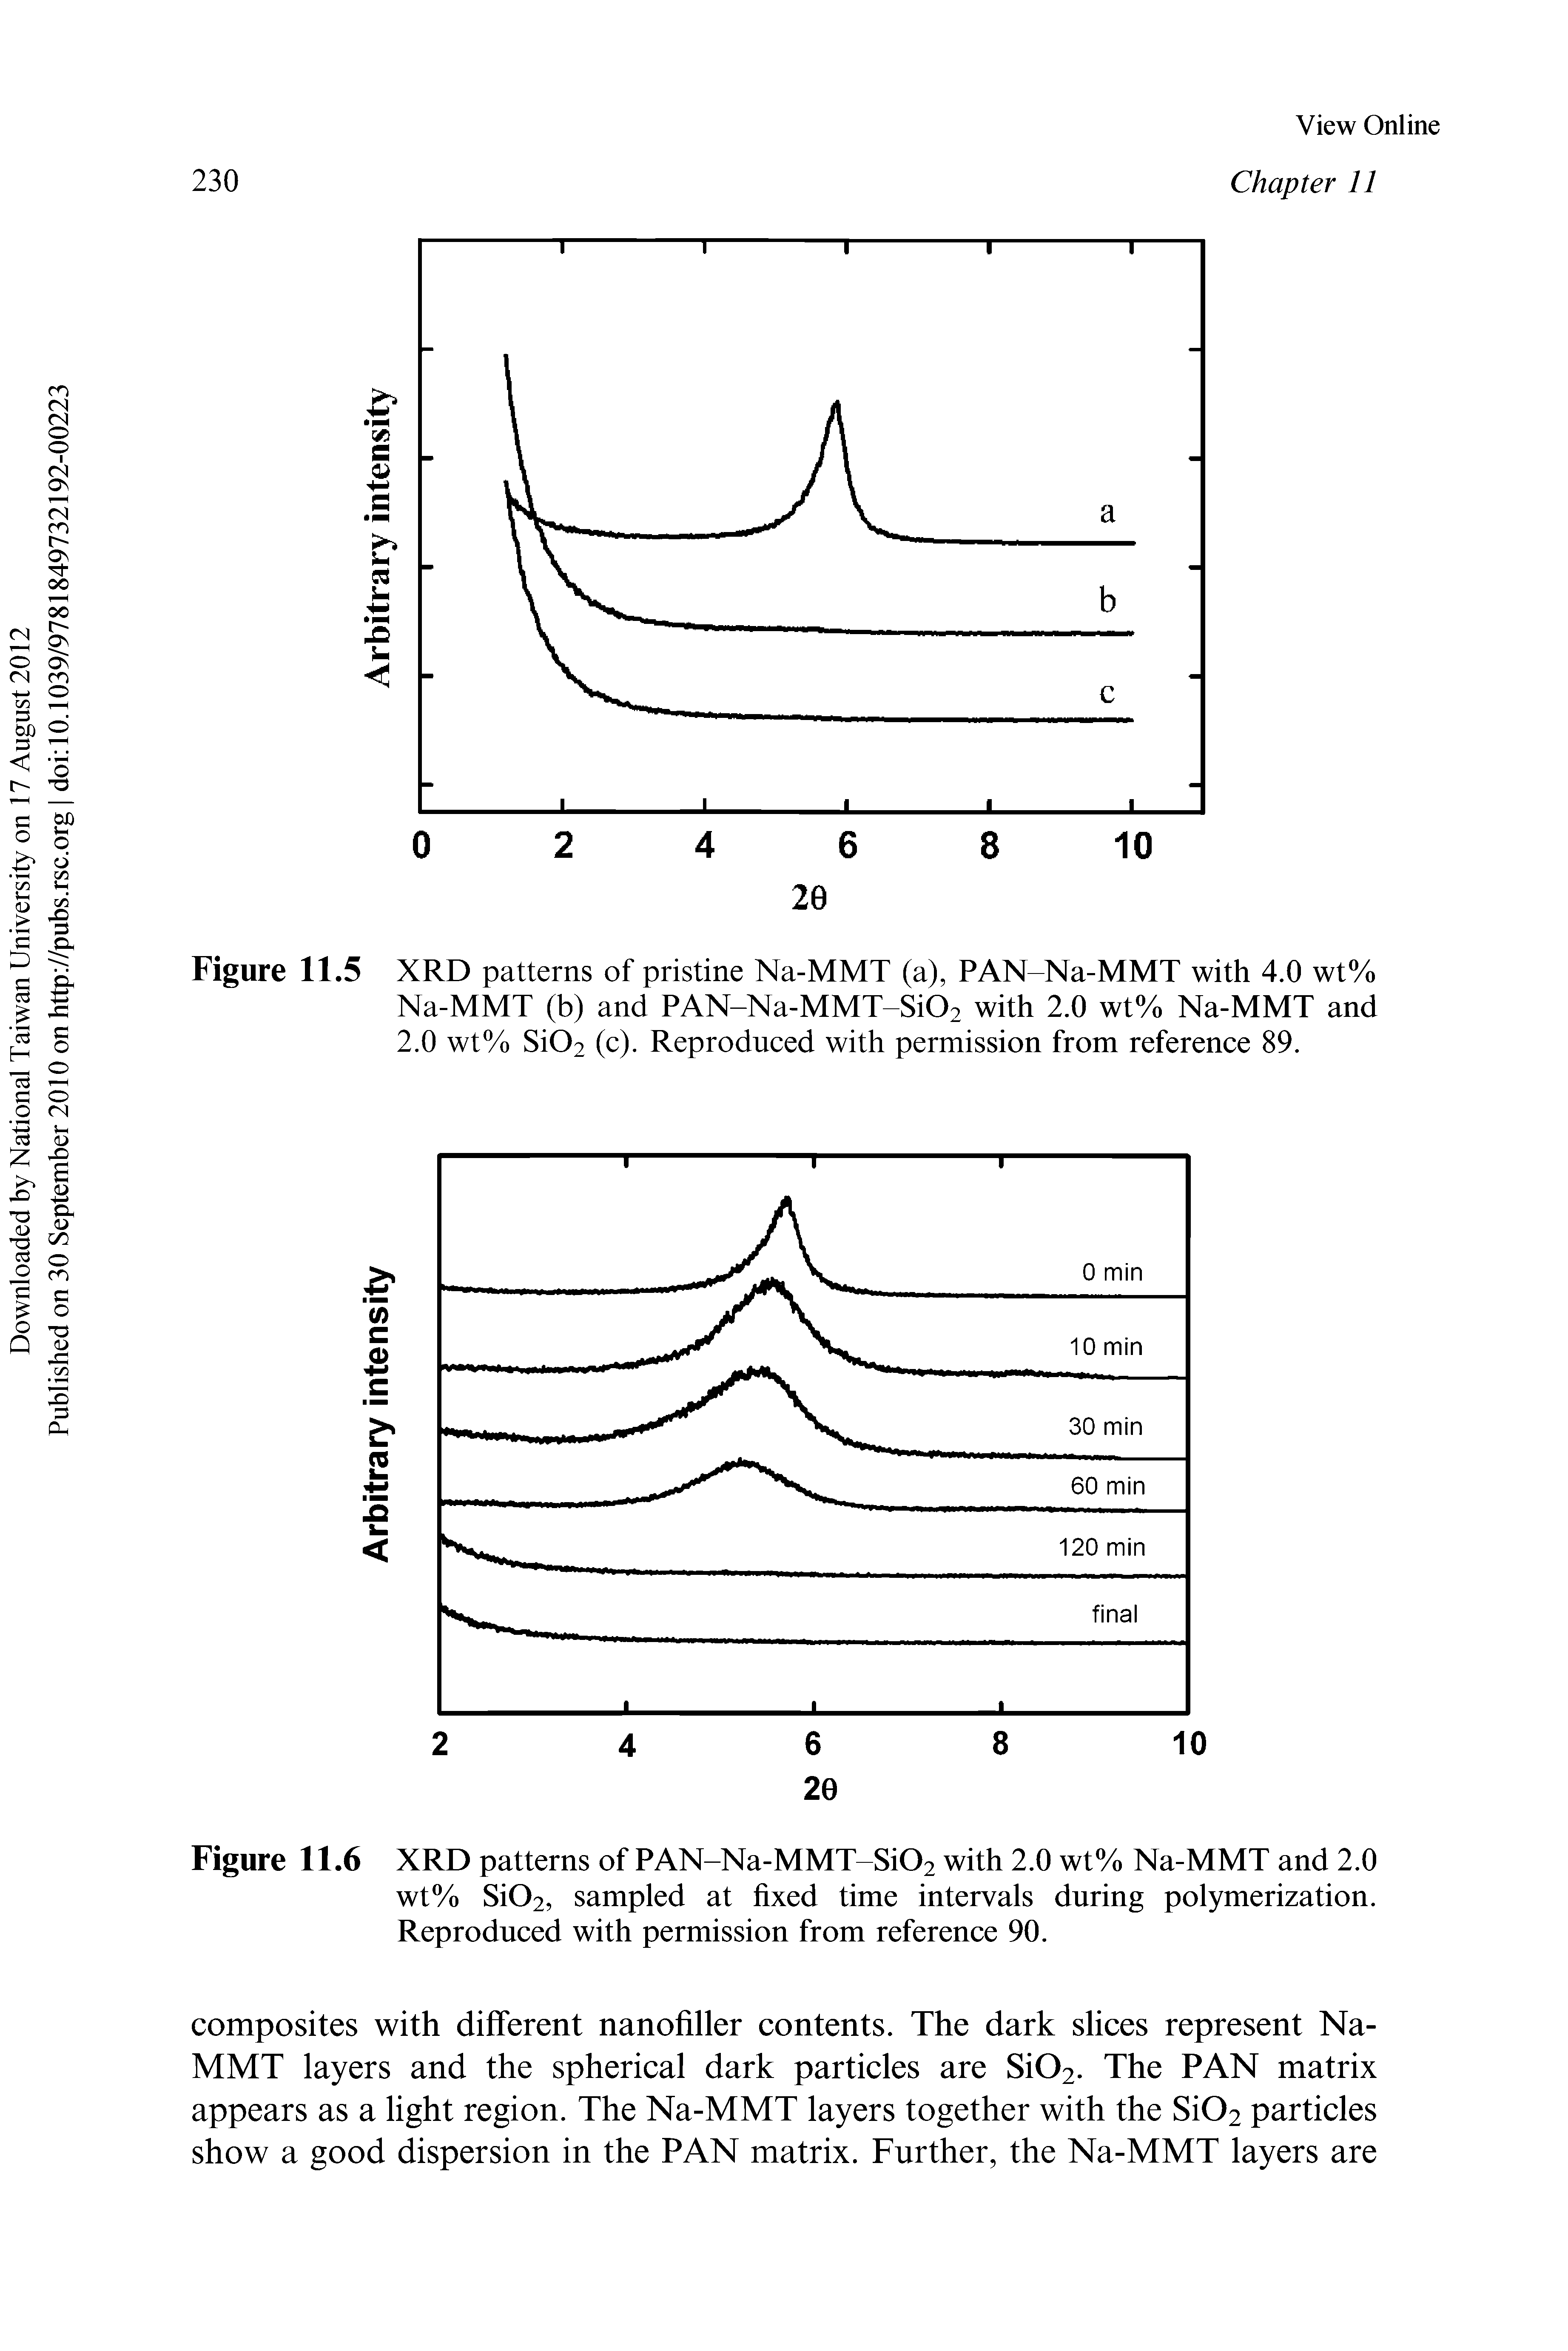 Figure 11.6 XRD patterns of PAN-Na-MMT-Si02 with 2.0 wt% Na-MMT and 2.0 wt% Si02, sampled at fixed time intervals during polymerization. Reproduced with permission from reference 90.